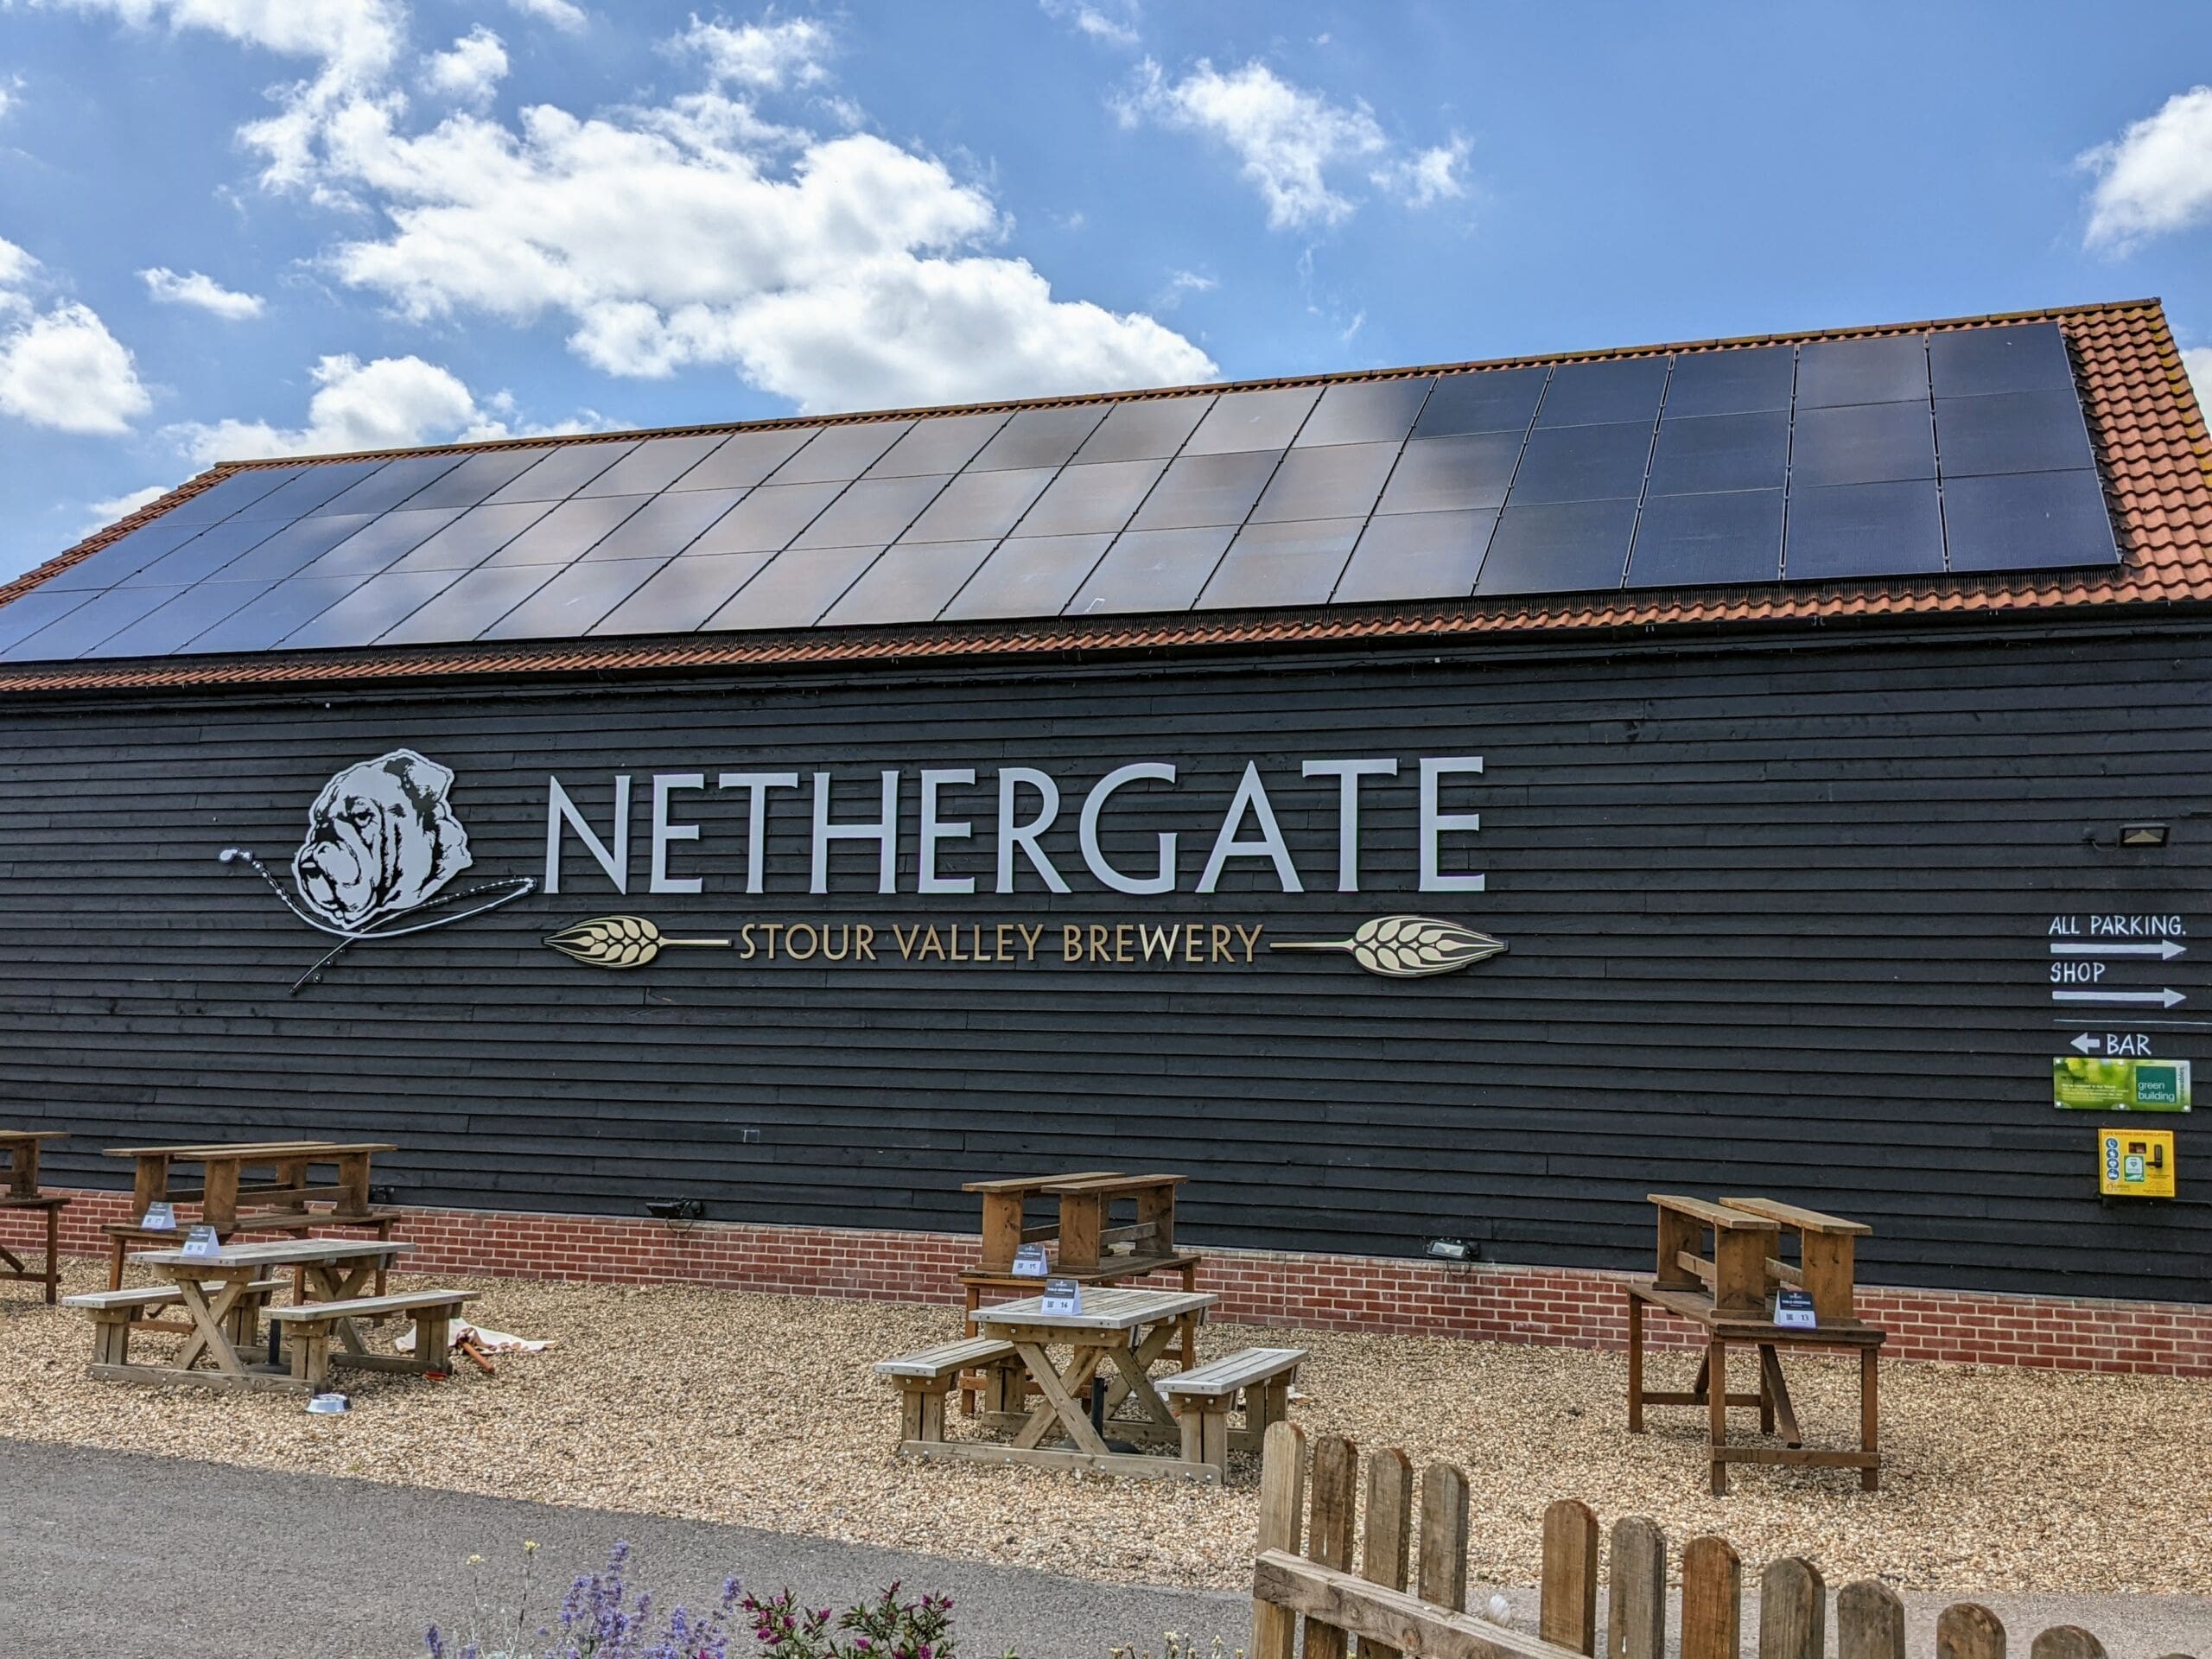 A building with 'Nethergate' across the from with solar panels on the roof